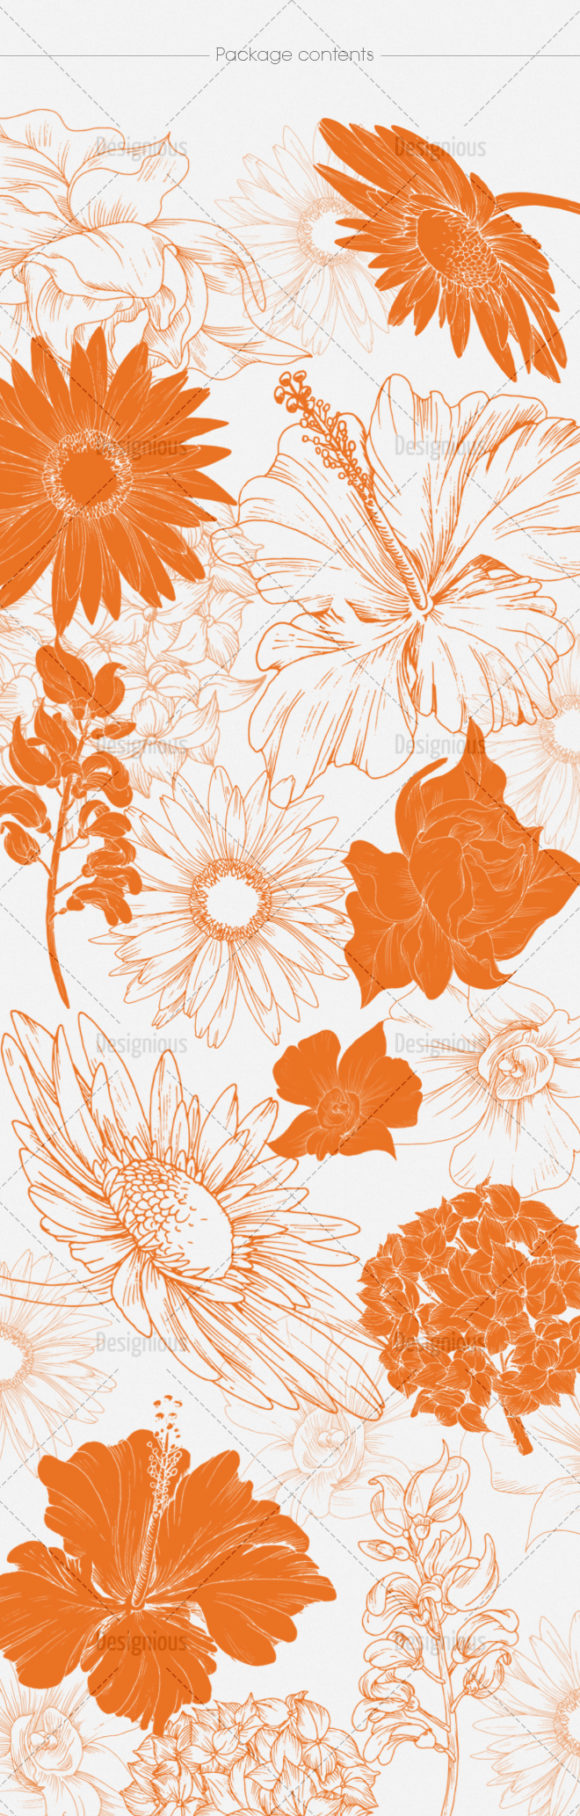 Floral Brushes Pack 39 2